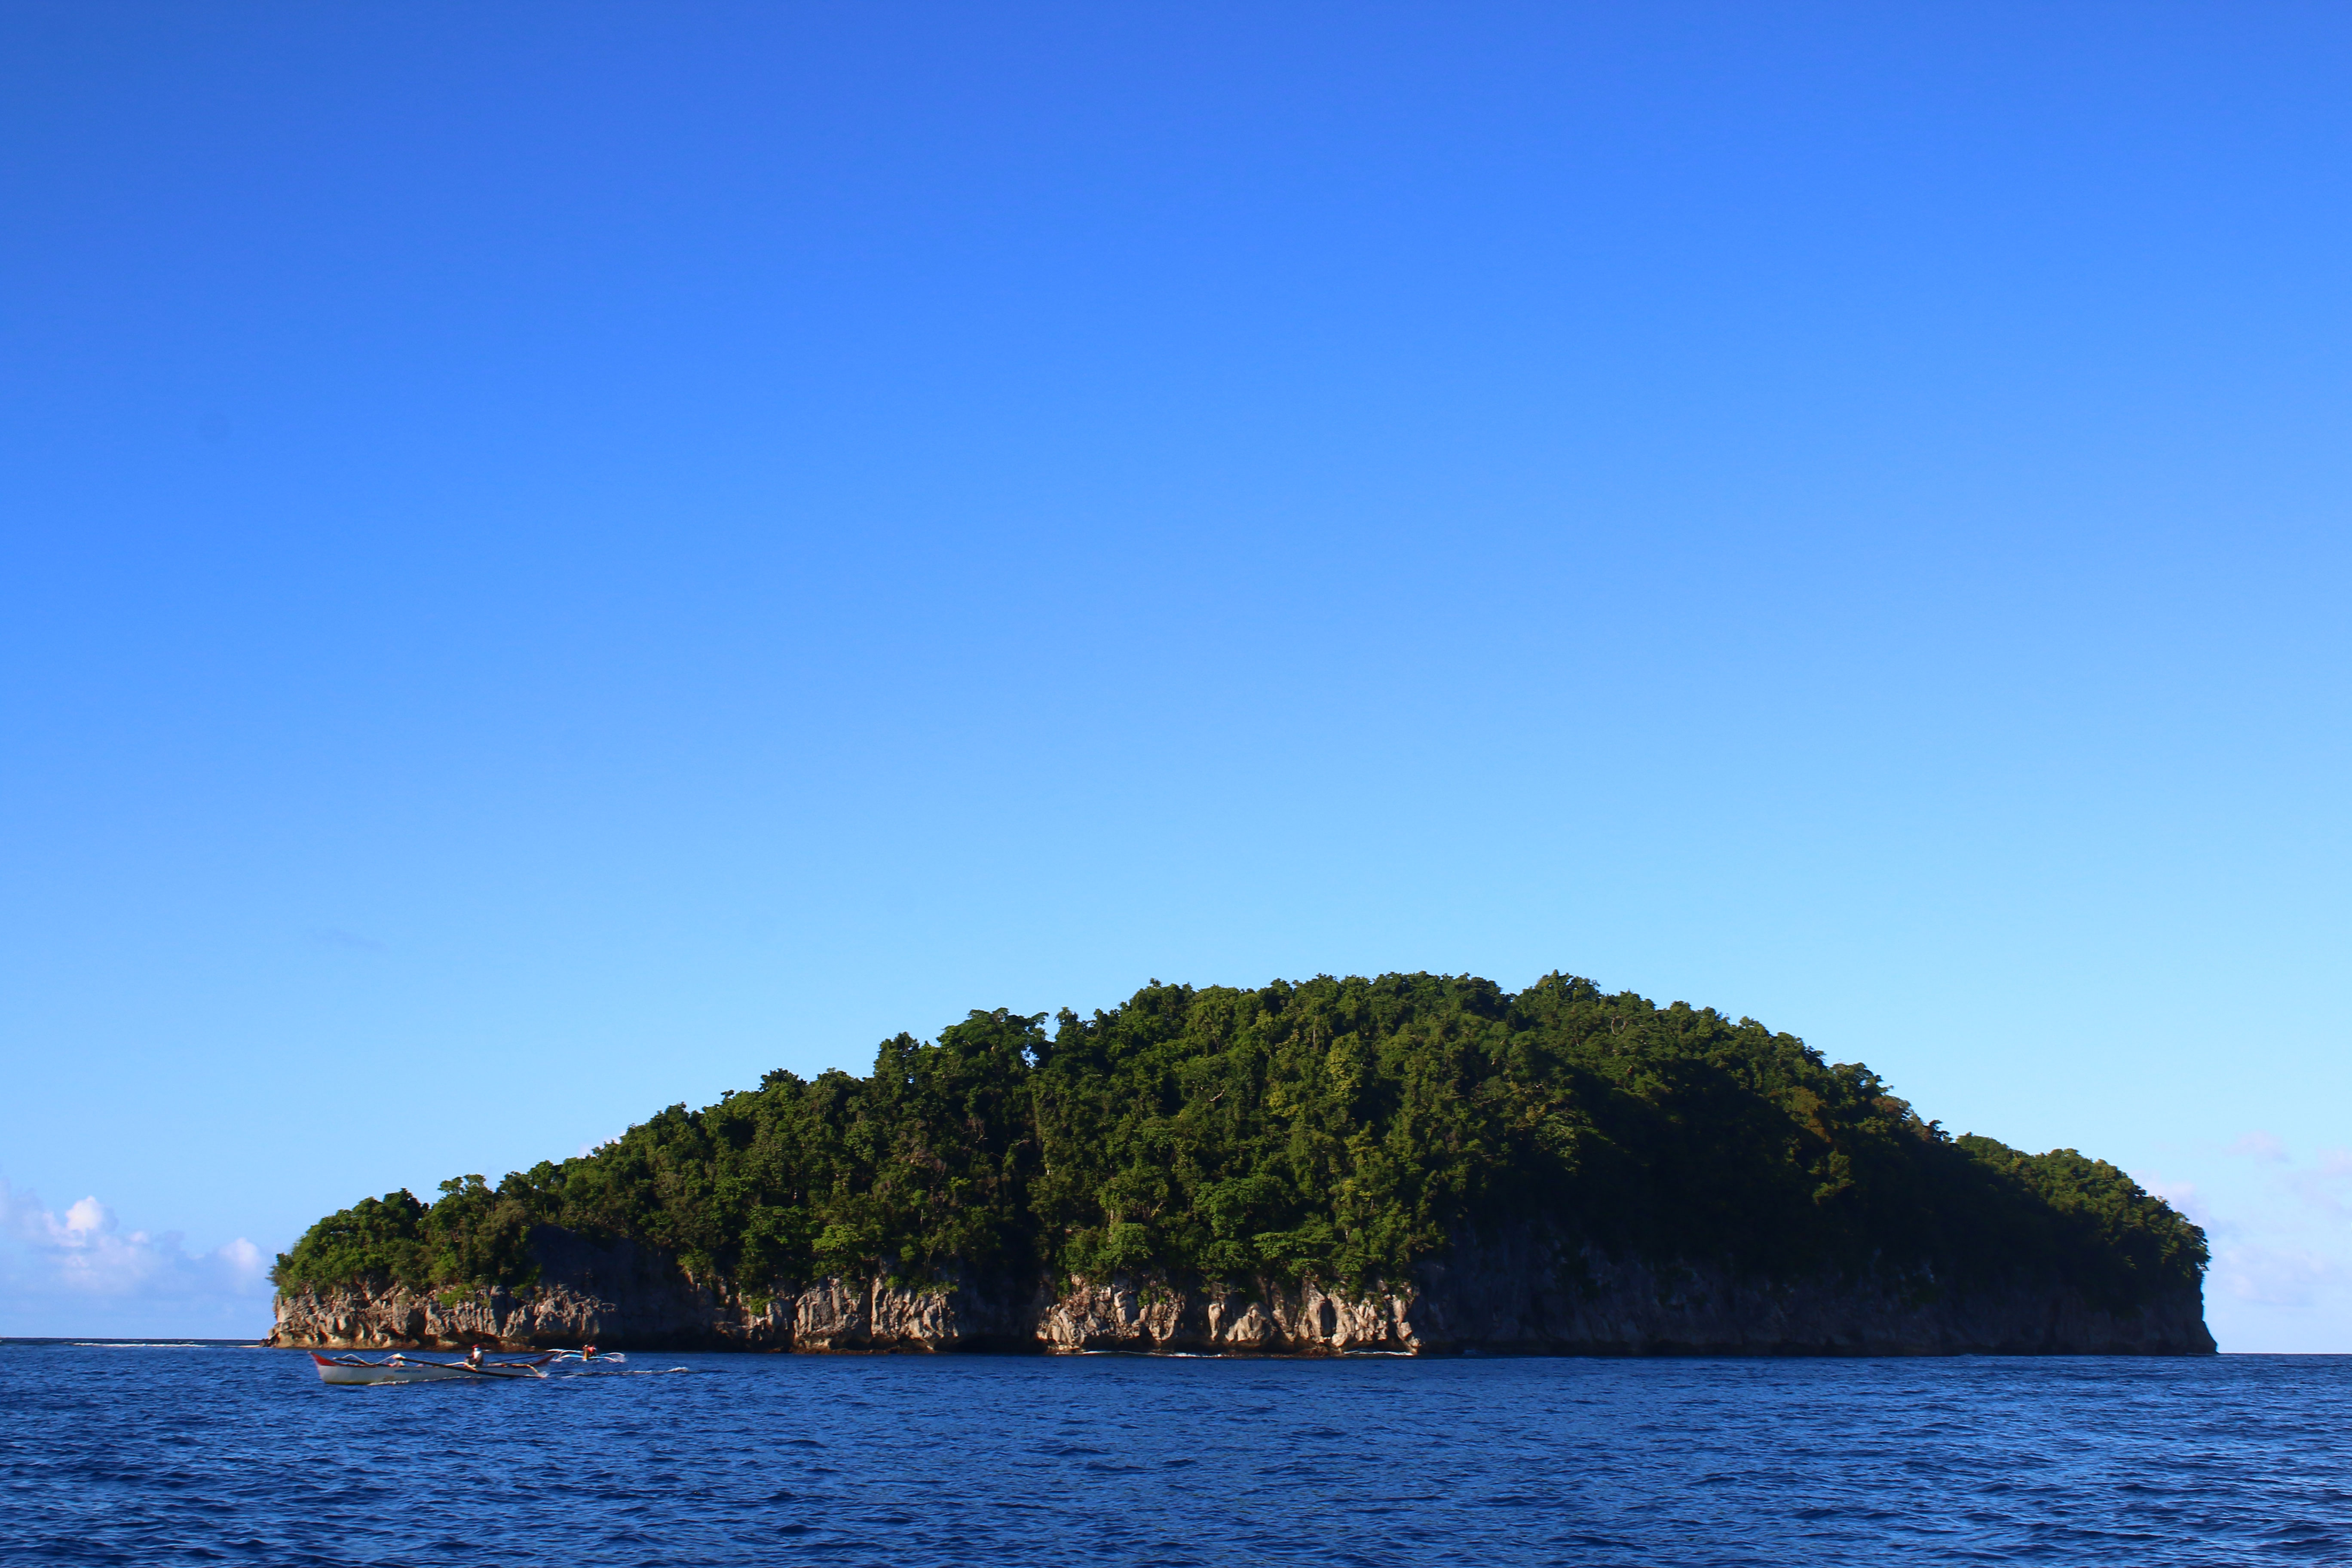 <b class="font-bara"><i class="bi bi-geo-fill h4"></i> MANCAGANGI ISLAND</b> <br/>A haven of bats and other wildlife, this huge limestone formation is located on the northeast of the City. It can be reached by boat within forty-five minutes. Relaxing cruise to the island will allow the tourists to appreciate the dramatic ocean sceneries and experience the fun as they triumph over rushing waves. The island has a perfect white-sand beach that gives way to emerald waters and animate corals. However, it is not advisable to go to the island on rainy seasons. Accessibility, only by boat, thus depends on the weather condition and tide.